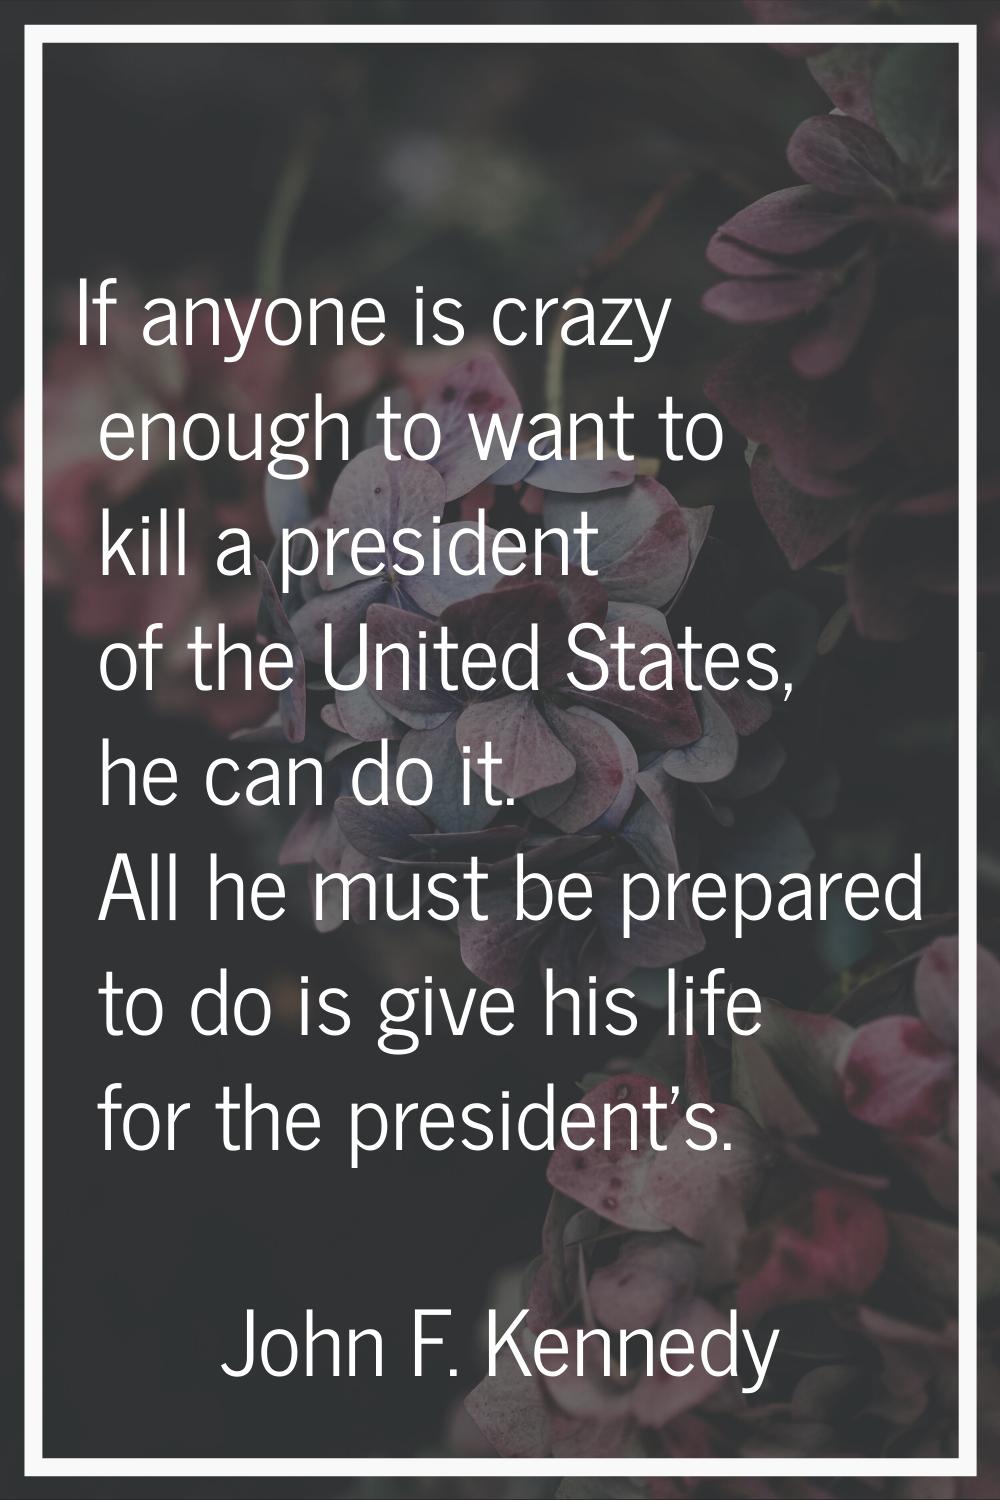 If anyone is crazy enough to want to kill a president of the United States, he can do it. All he mu